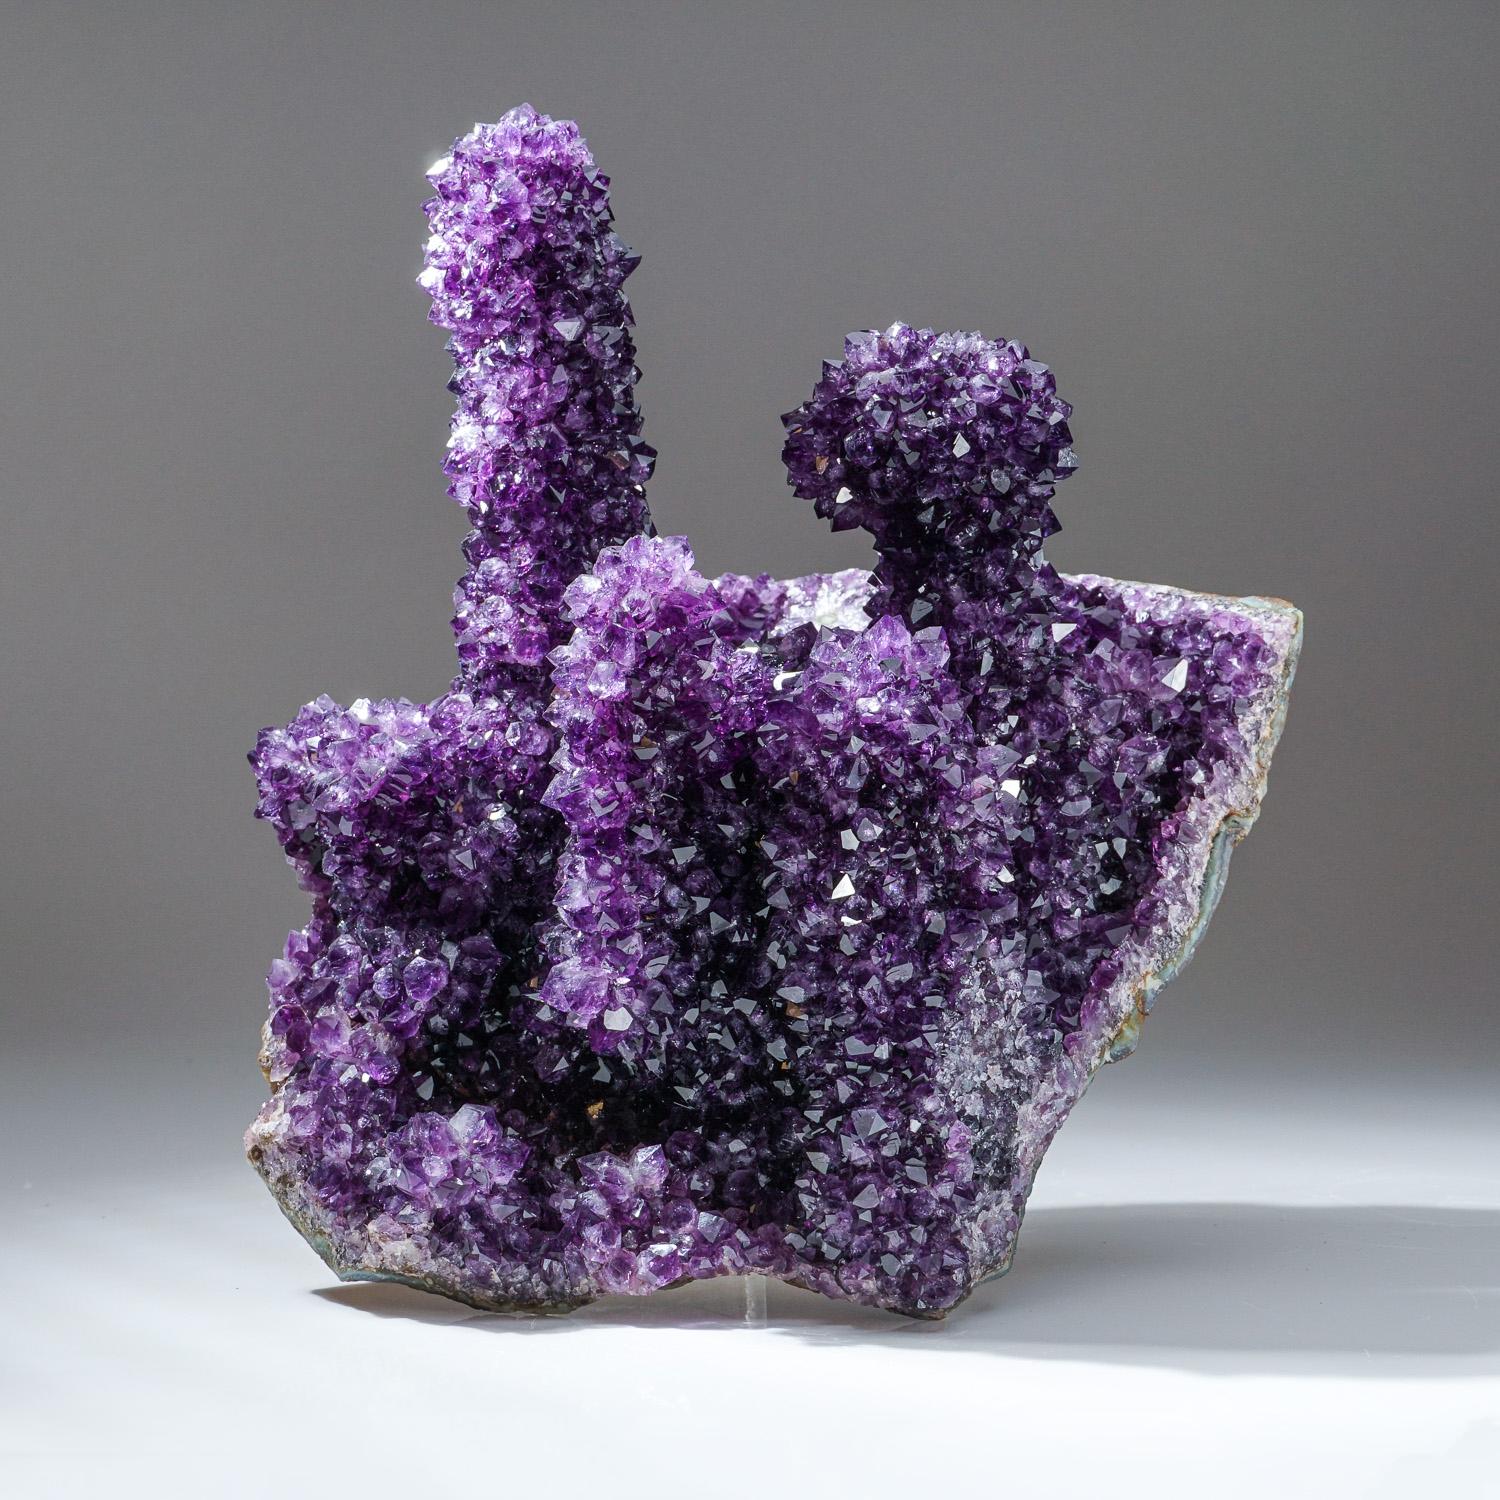 This specimen is a world-class, museum-quality stalactite form of the finest gem-quality Amethyst - from the famous regions of Artigas, Uruguay. This specimen is showing huge, stalactite formations, inter-locking in a cluster, and displaying top